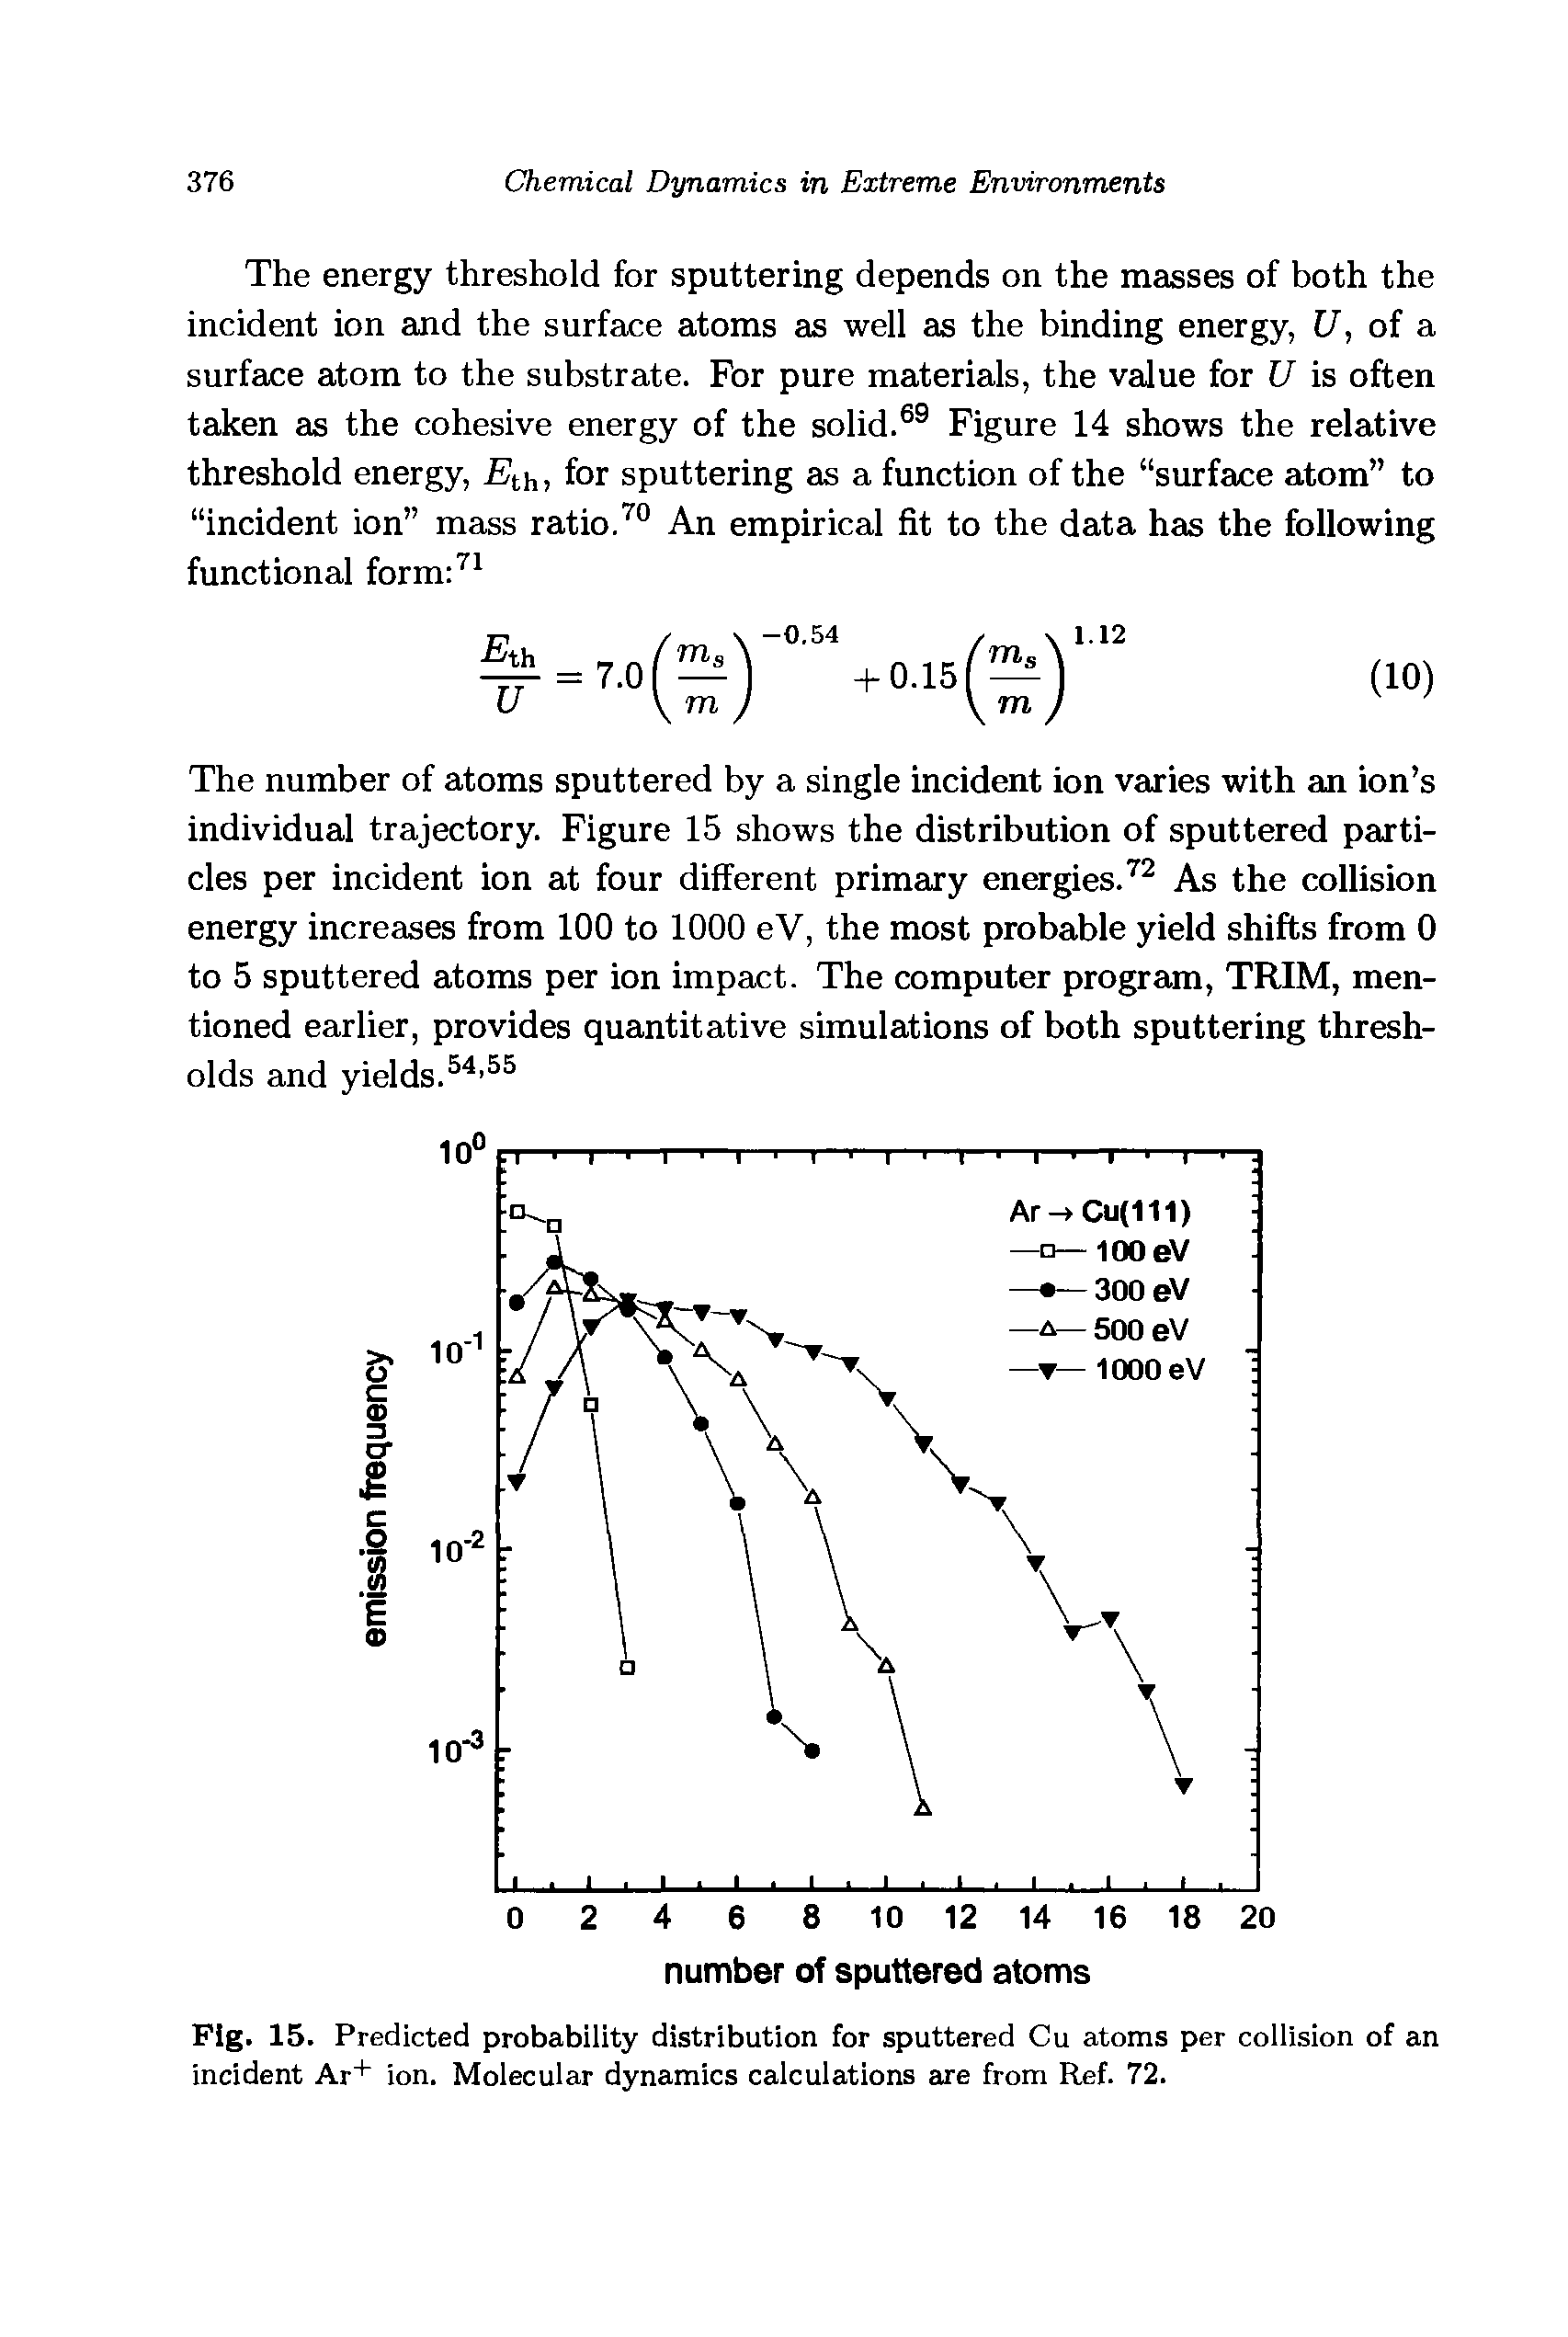 Fig. 15. Predicted probability distribution for sputtered Cu atoms per collision of an incident Ar+ ion. Molecular dynamics calculations axe from Ref. 72.